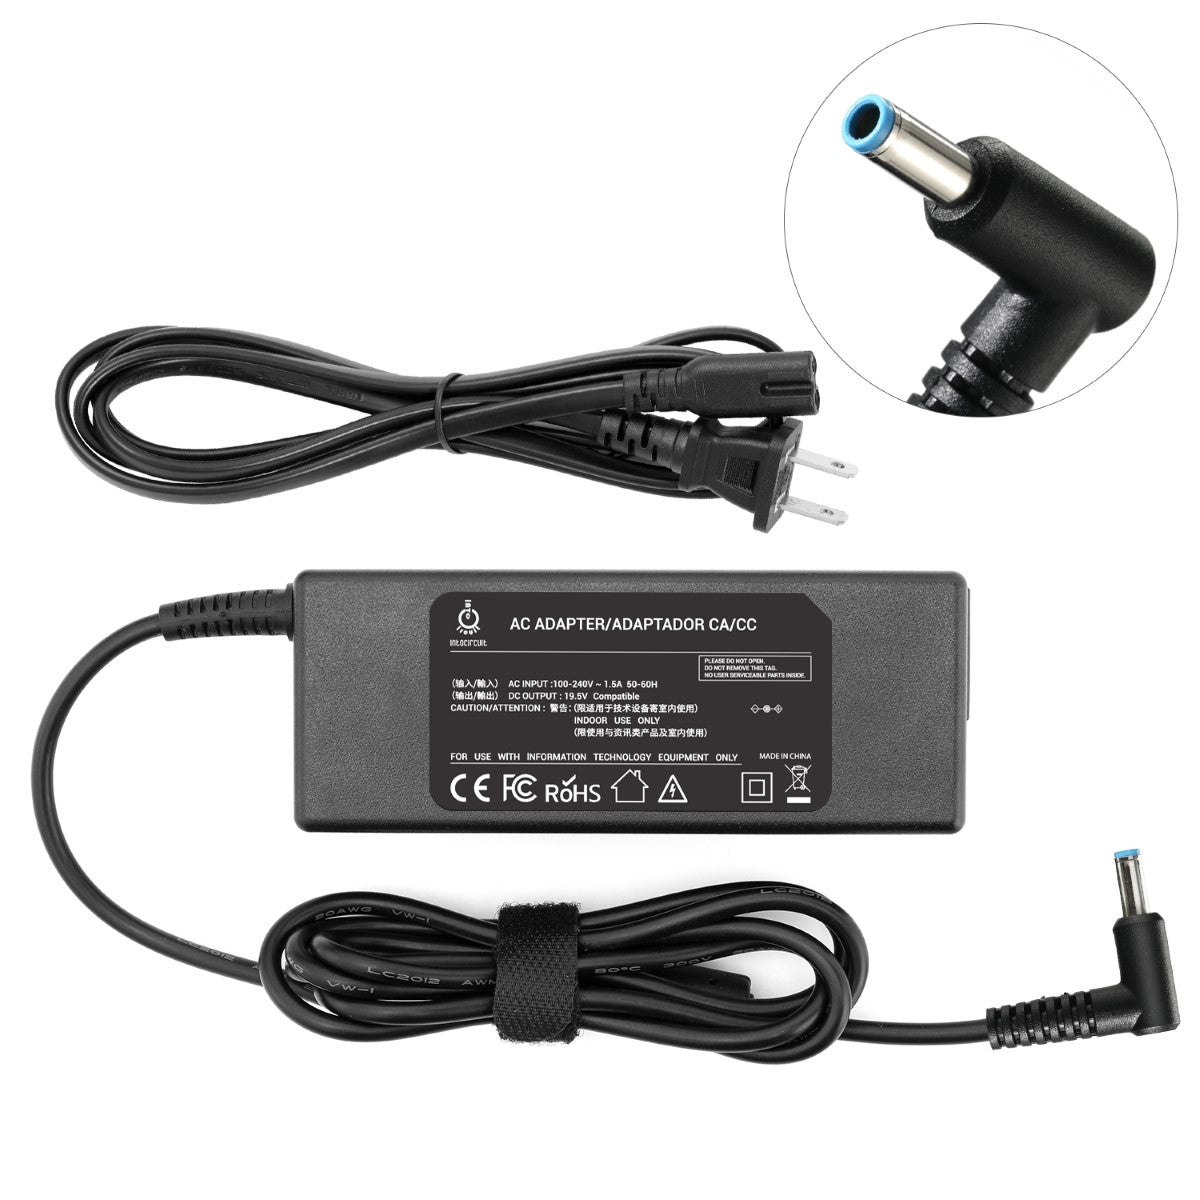 Charger for HP 15-g000sm Laptop